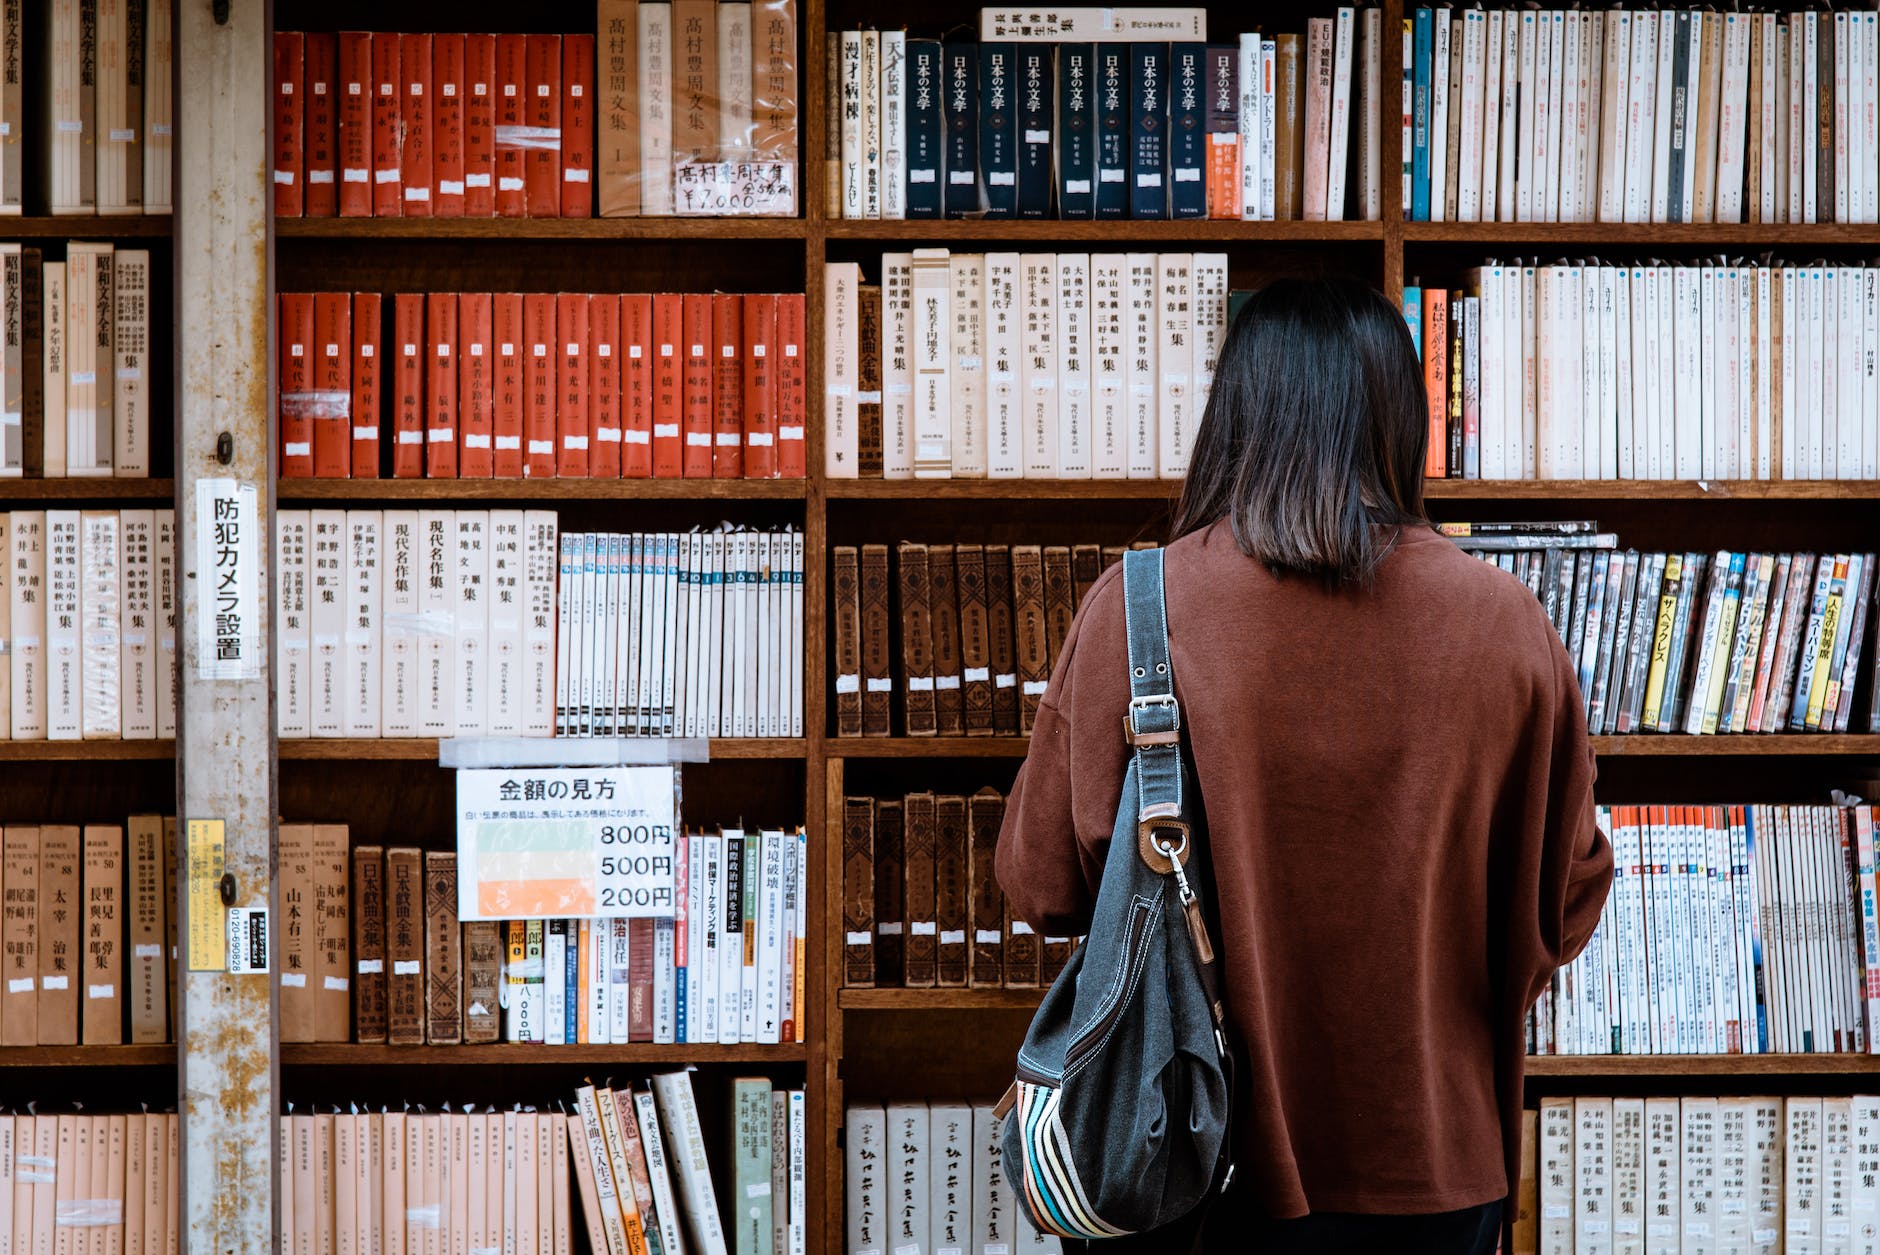 woman wearing brown shirt carrying black leather bag on front of library books conducting research